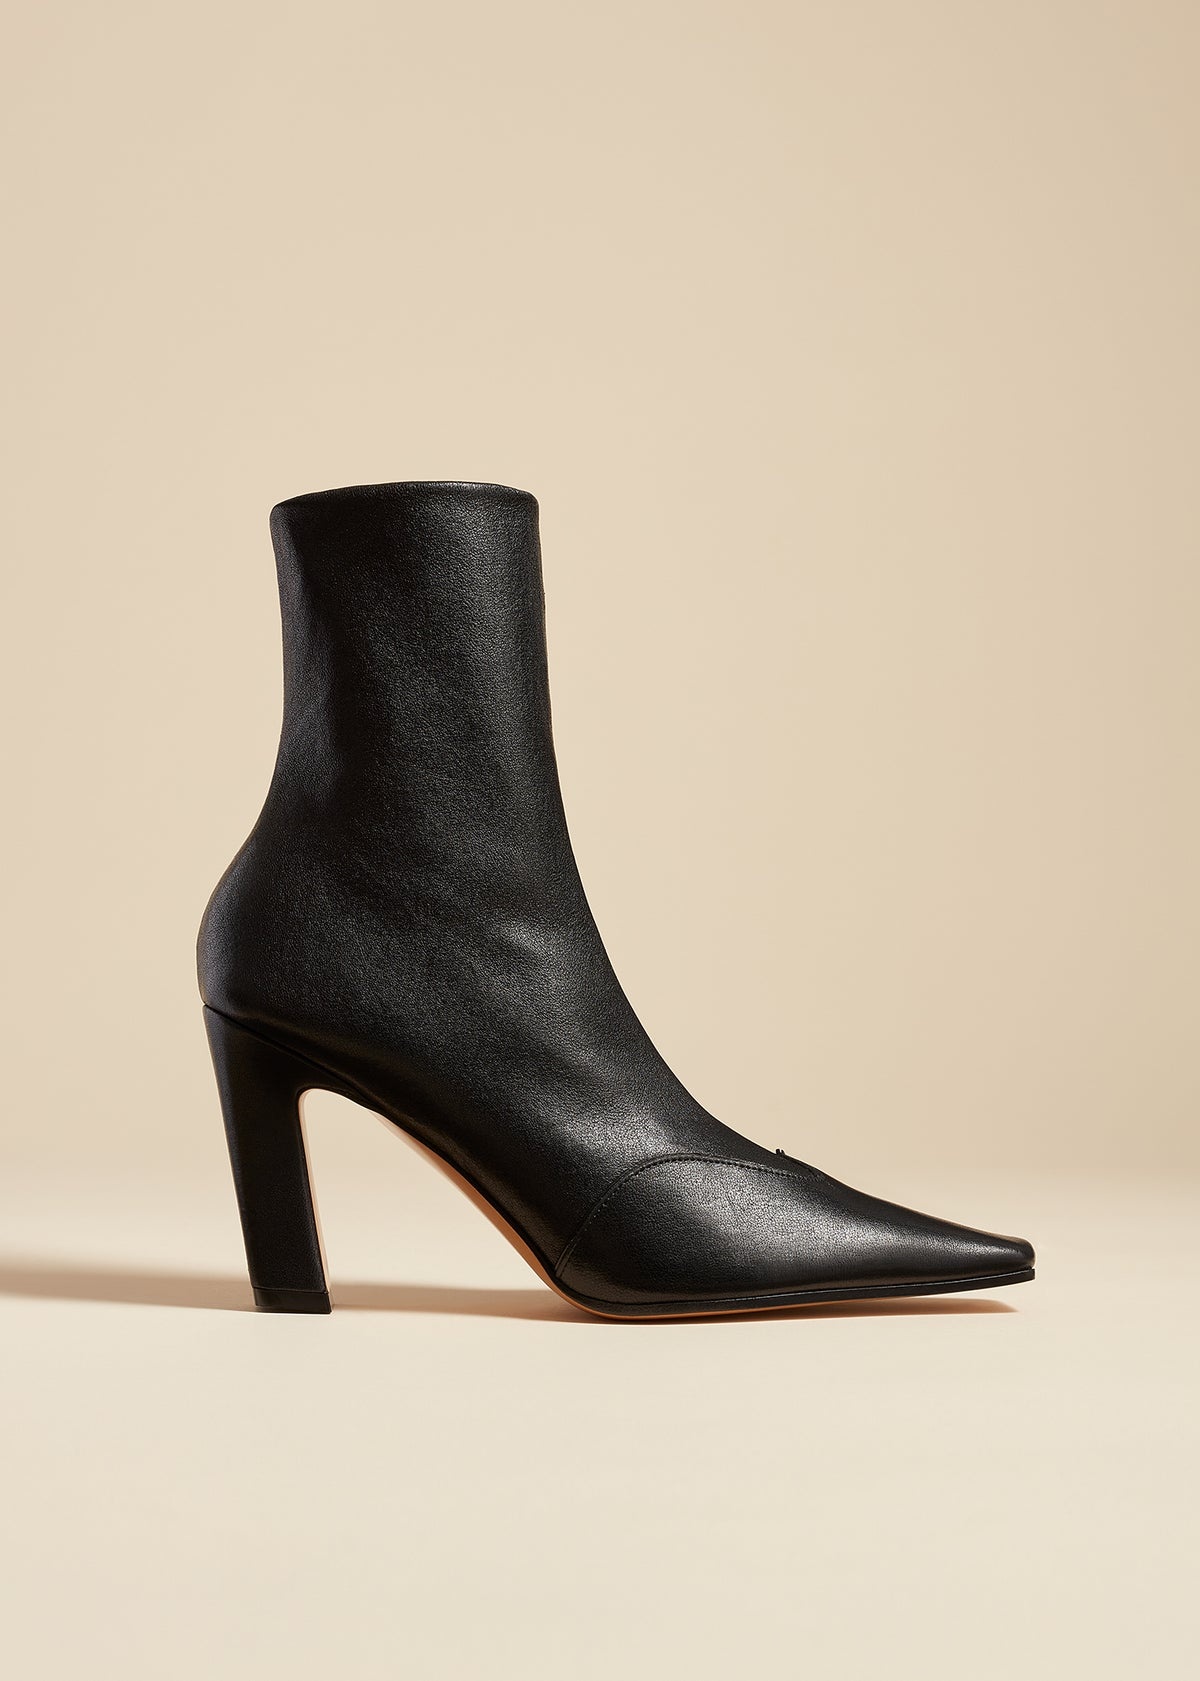 The Nevada Stretch High Boot in Black Nappa Leather - 1